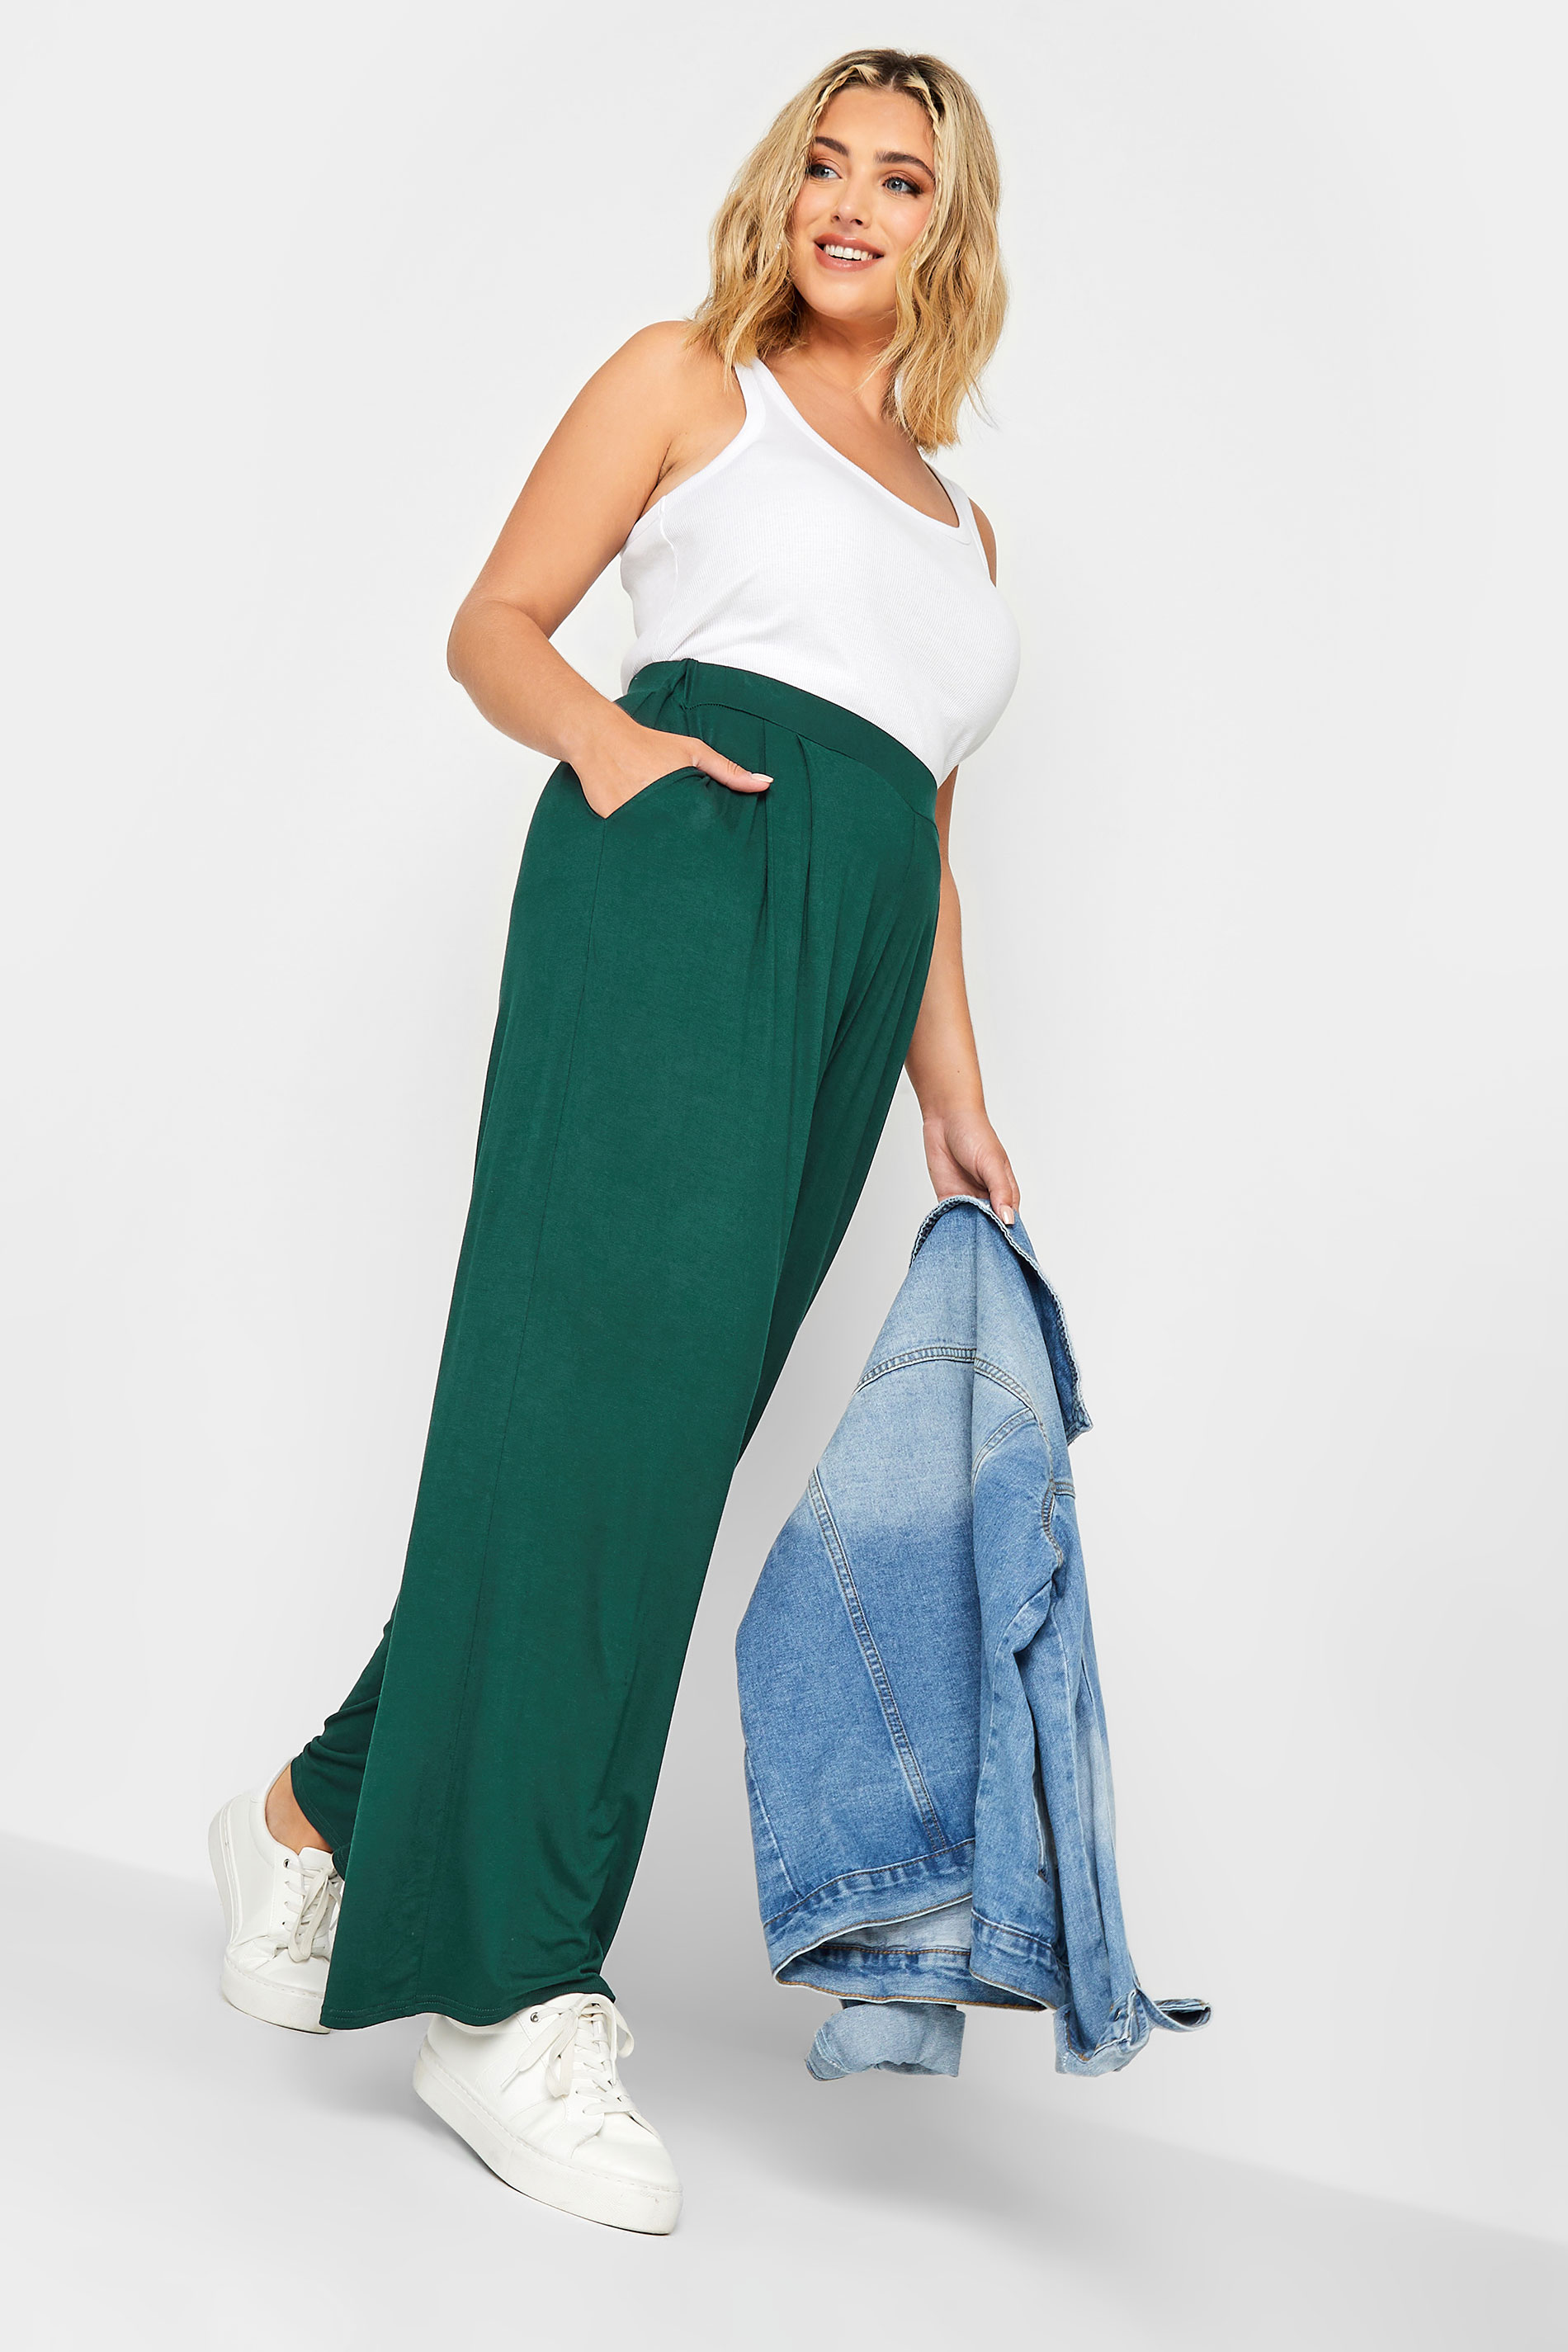 Quirky Pants You Absolutely Need by Natalie Krauter — VOL•UP•2 | Plus size  summer fashion, Curvy outfits, Plus size fashion